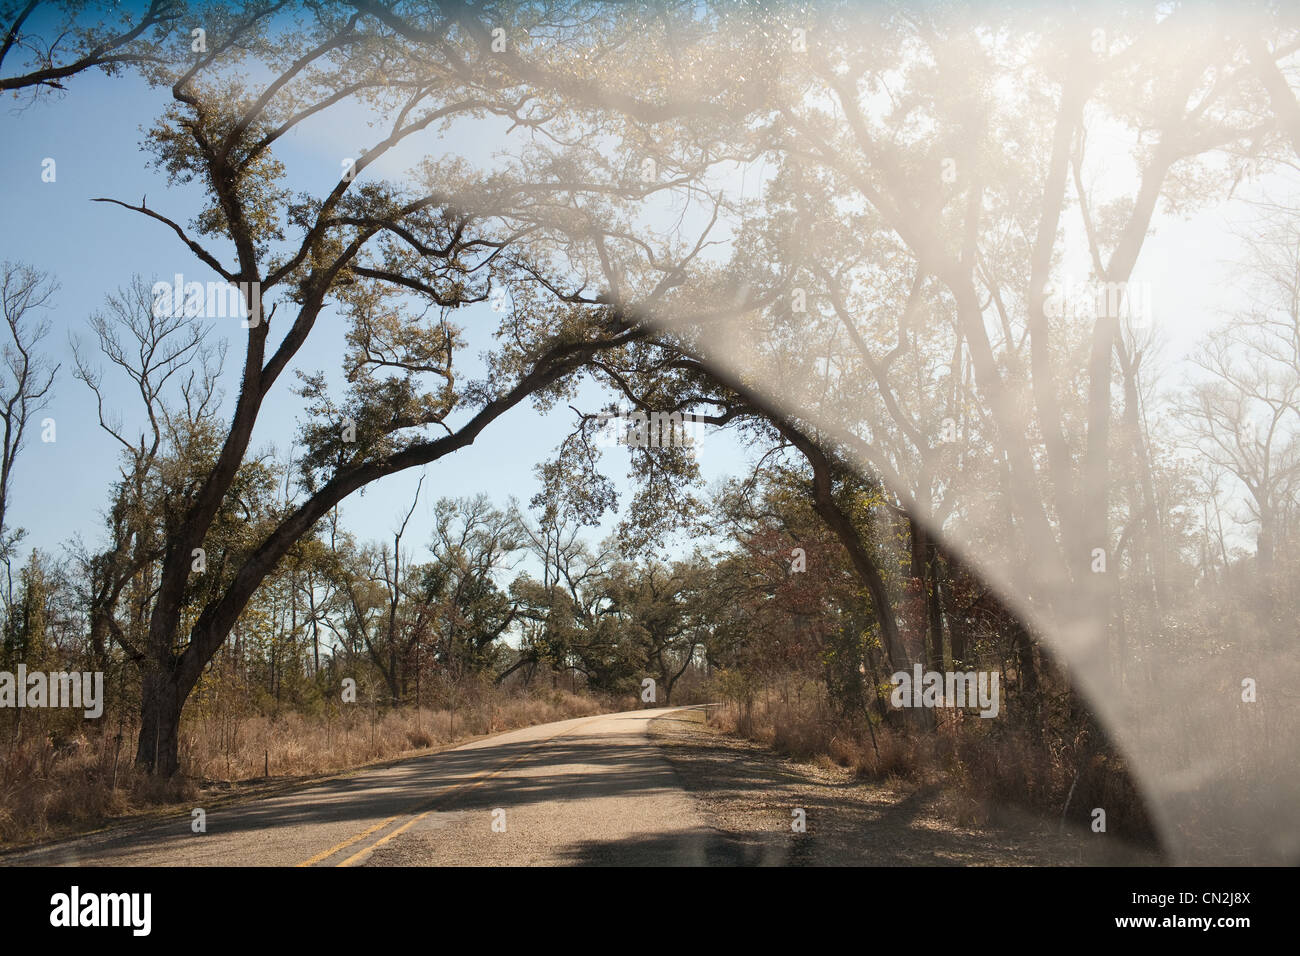 View of trees and road through car windscreen Stock Photo